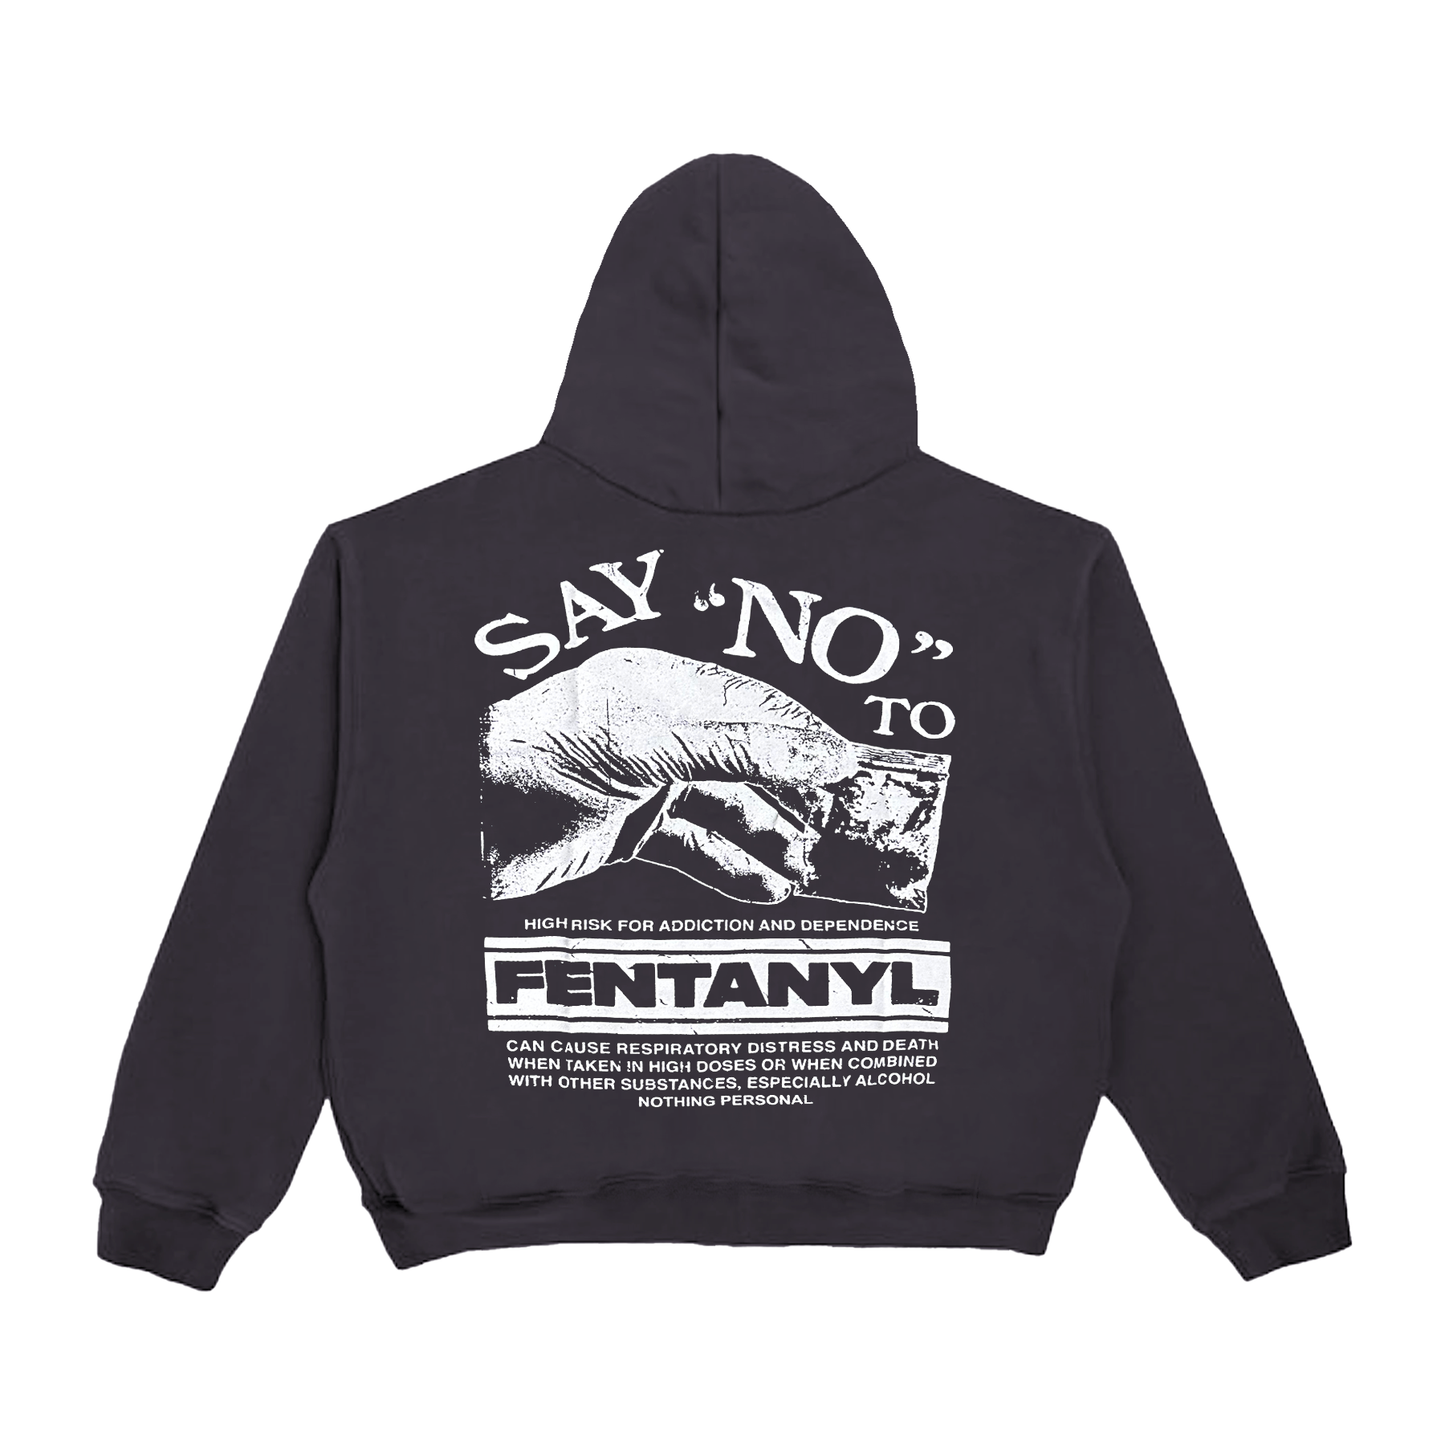 SAY NO TO FENTANYL HOODIE